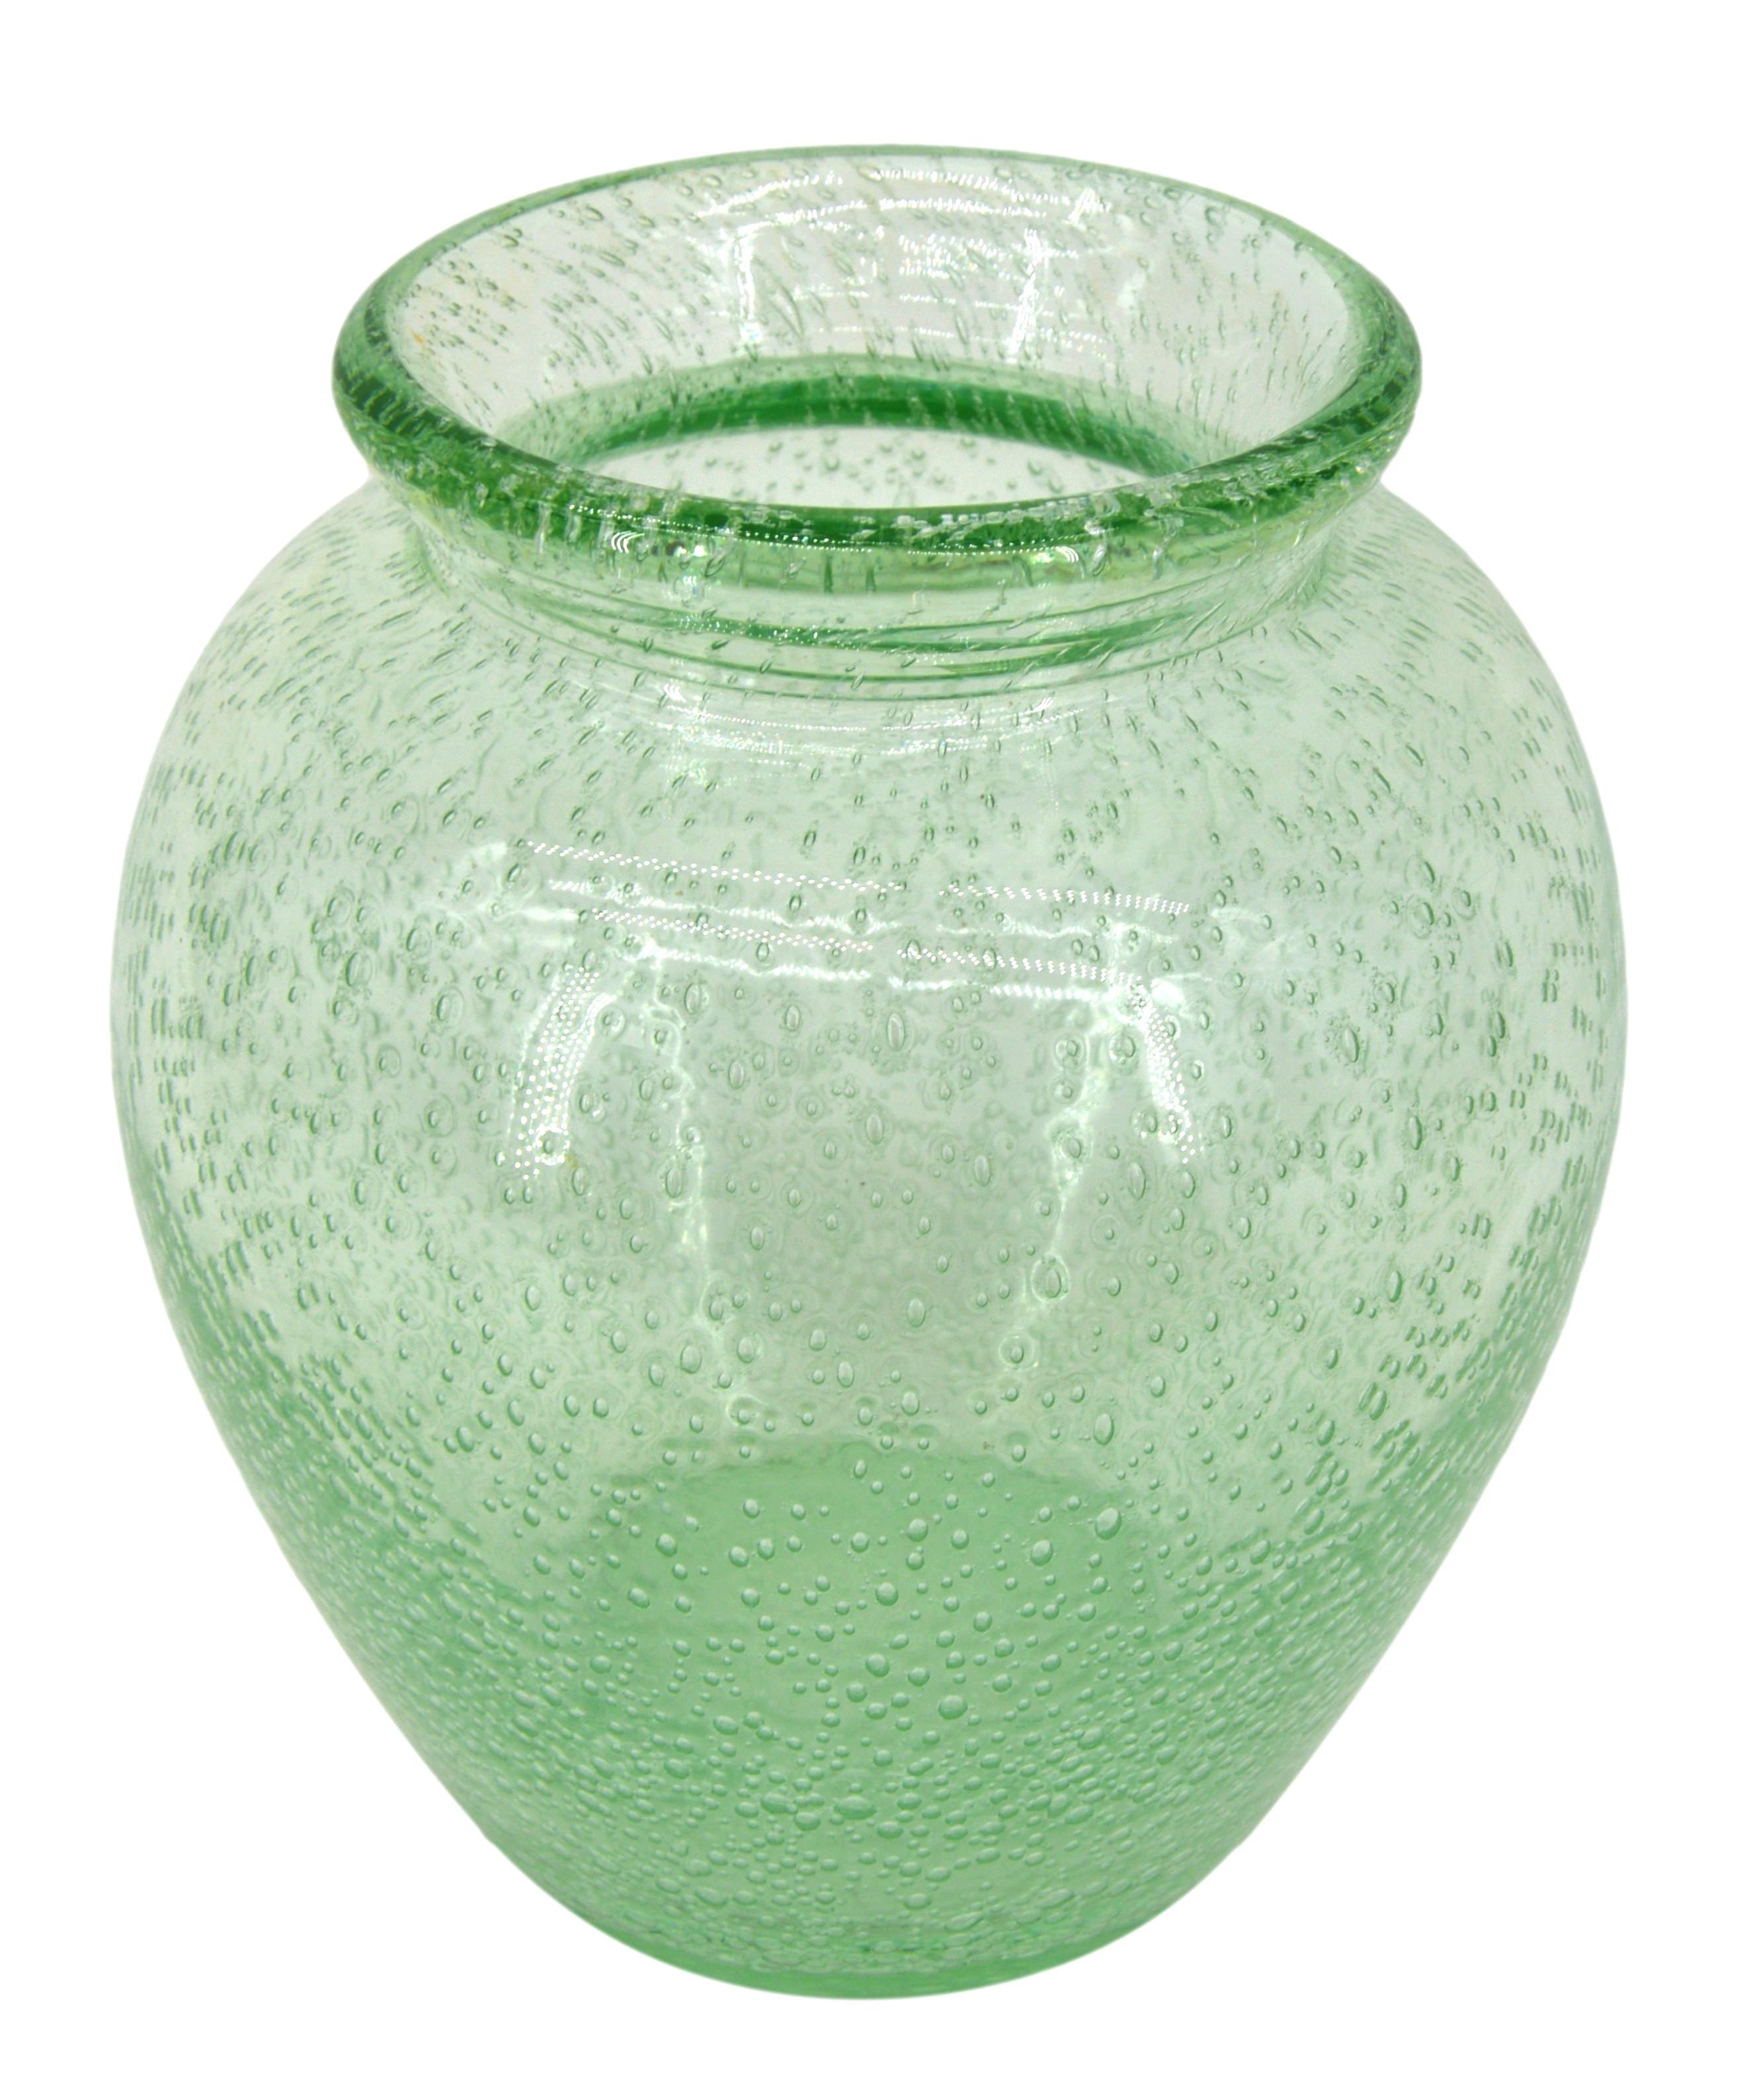 French Art Deco glass vase by Daum (Nancy), France, 1930s. Thick blown and bubbled glass vase. Color : green. Height : 7.7